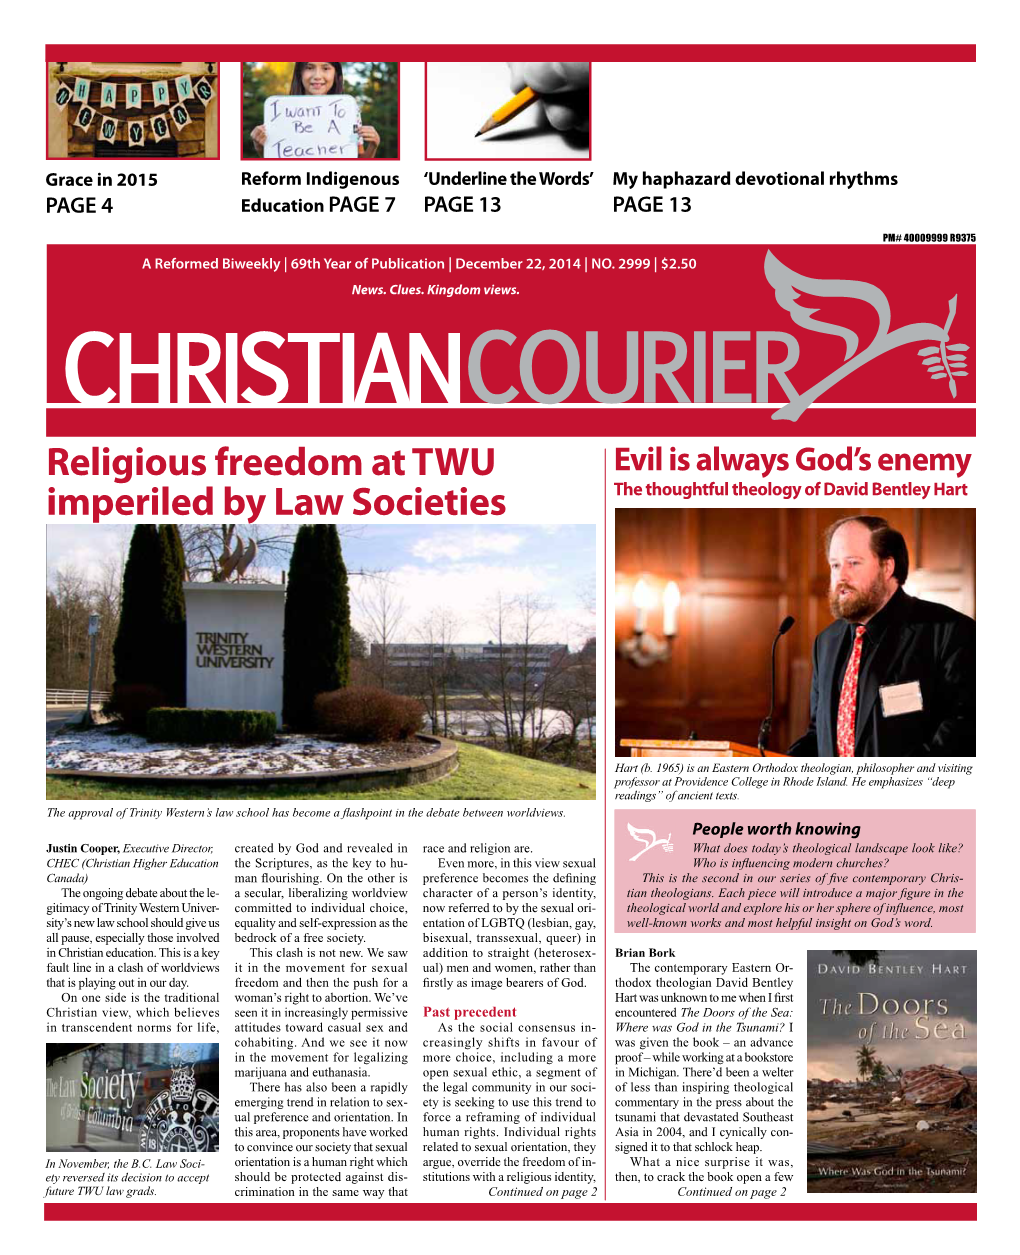 Religious Freedom at TWU Imperiled by Law Societies